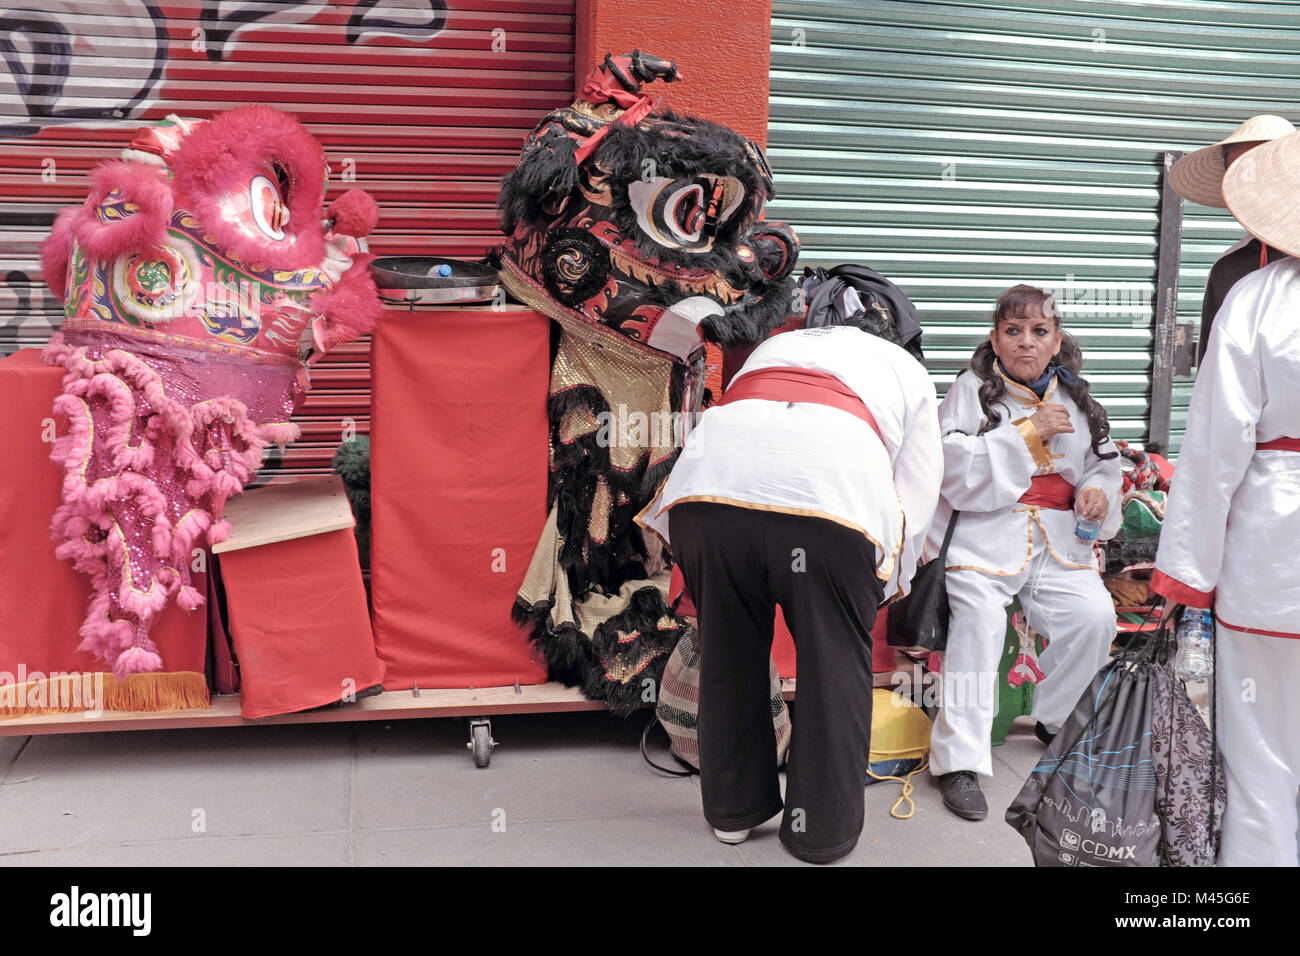 Women participating in the New Year celebration in Mexico City, Mexico Chinatown take a break from the festivities. Stock Photo